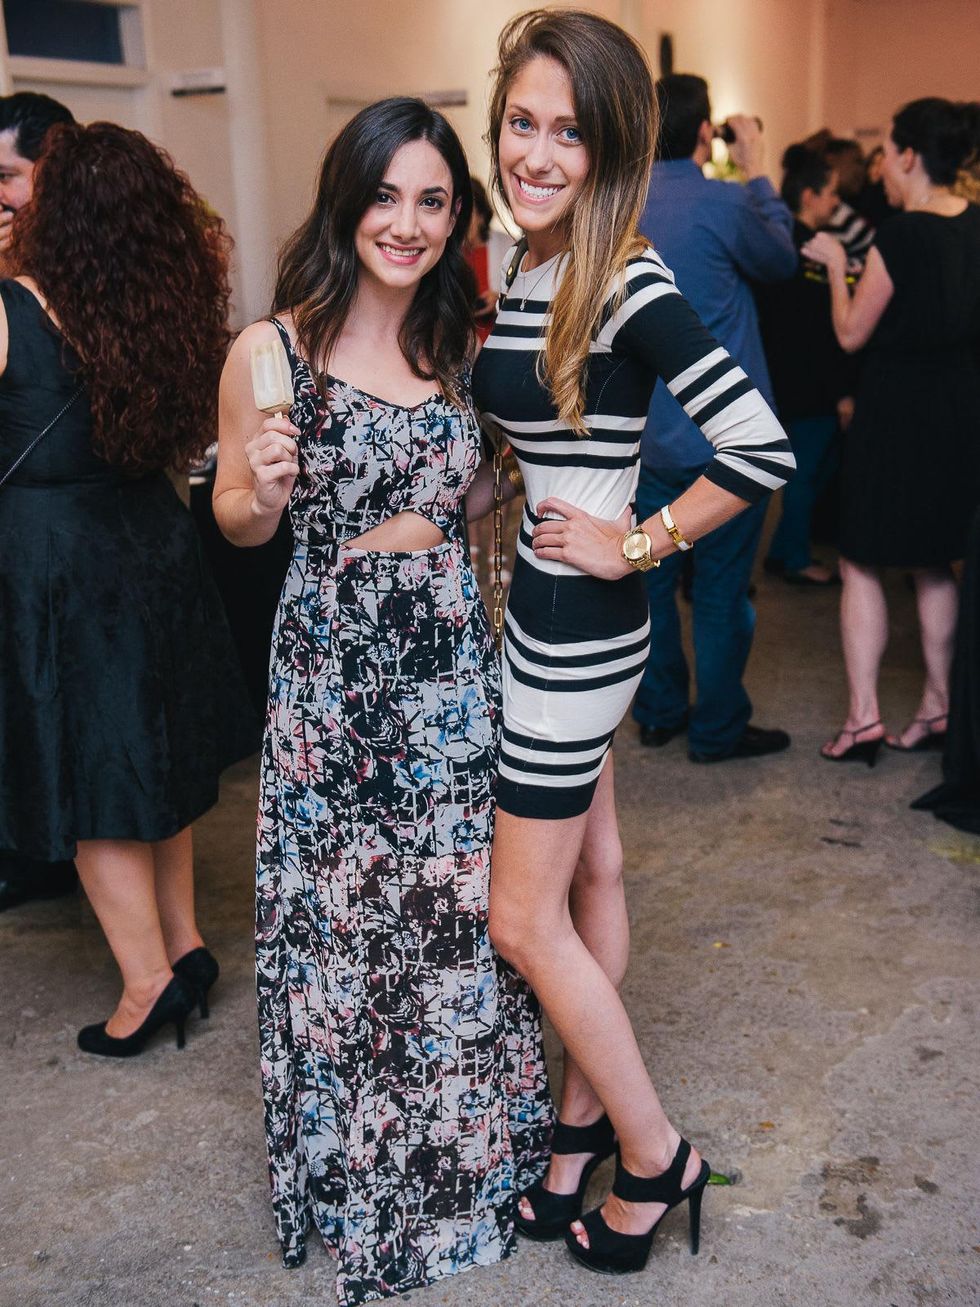 20 Jessica Meyerson, left, and Hilary Rosenstein at CultureMap's 2014 Tastemakers Awards May 2014